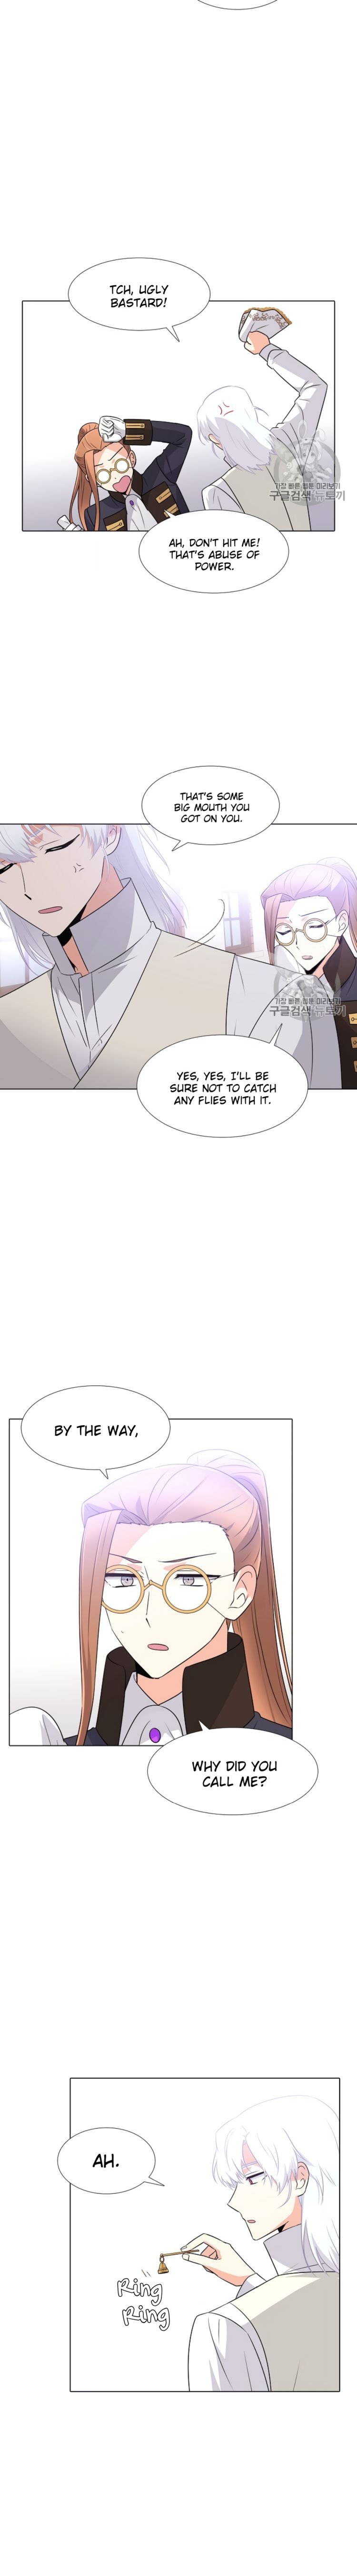 The Villain Discovered My Identity Chapter 6 - Page 7